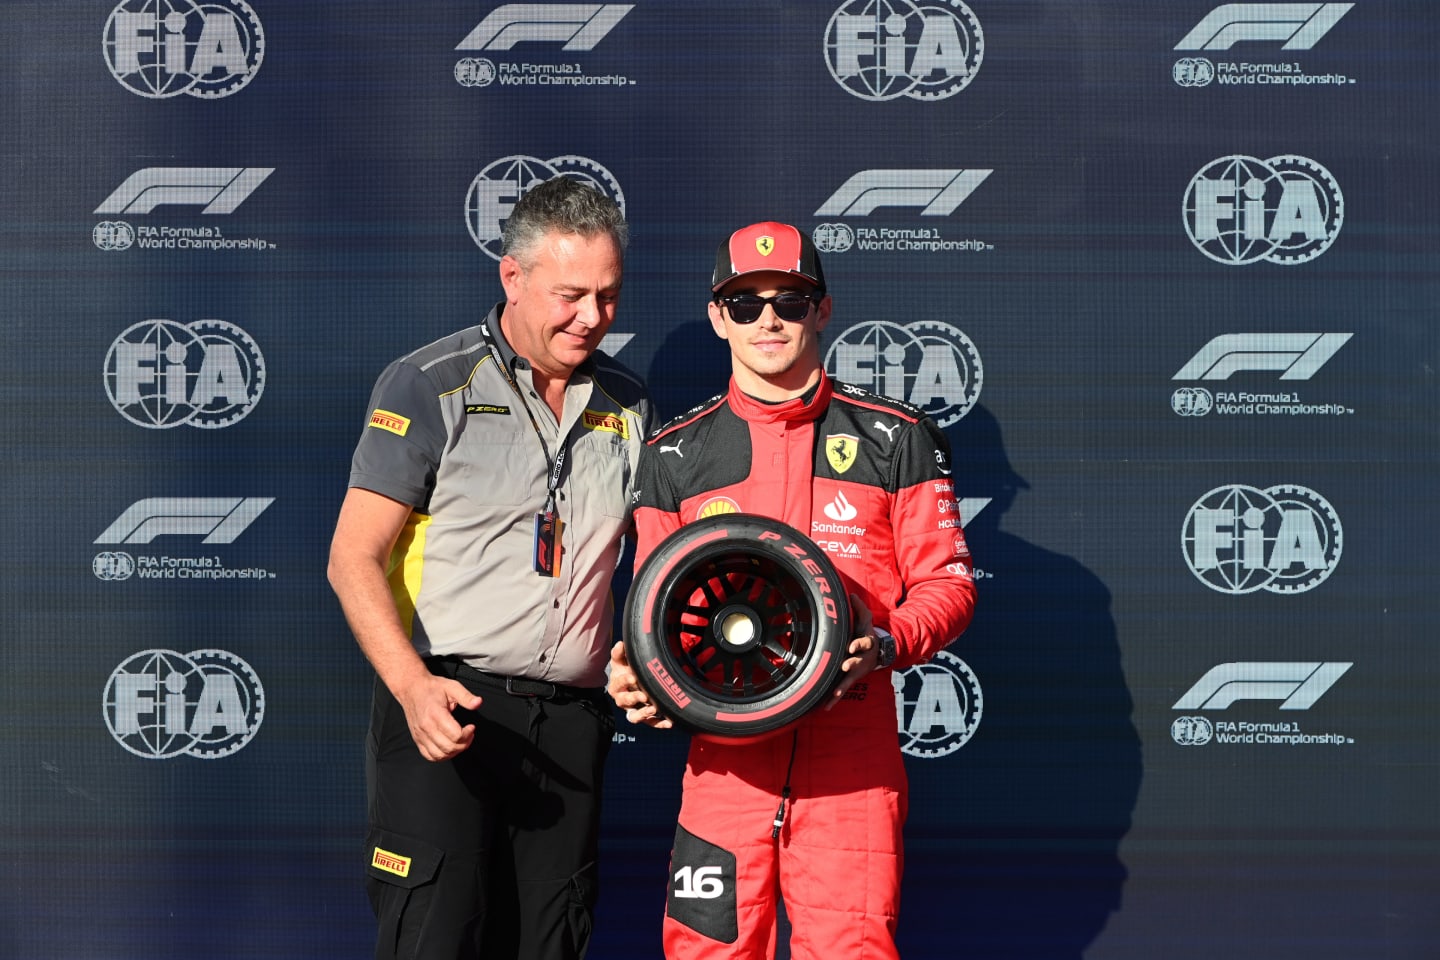 CIRCUIT OF THE AMERICAS, UNITED STATES OF AMERICA - OCTOBER 20: Pole man Charles Leclerc, Scuderia